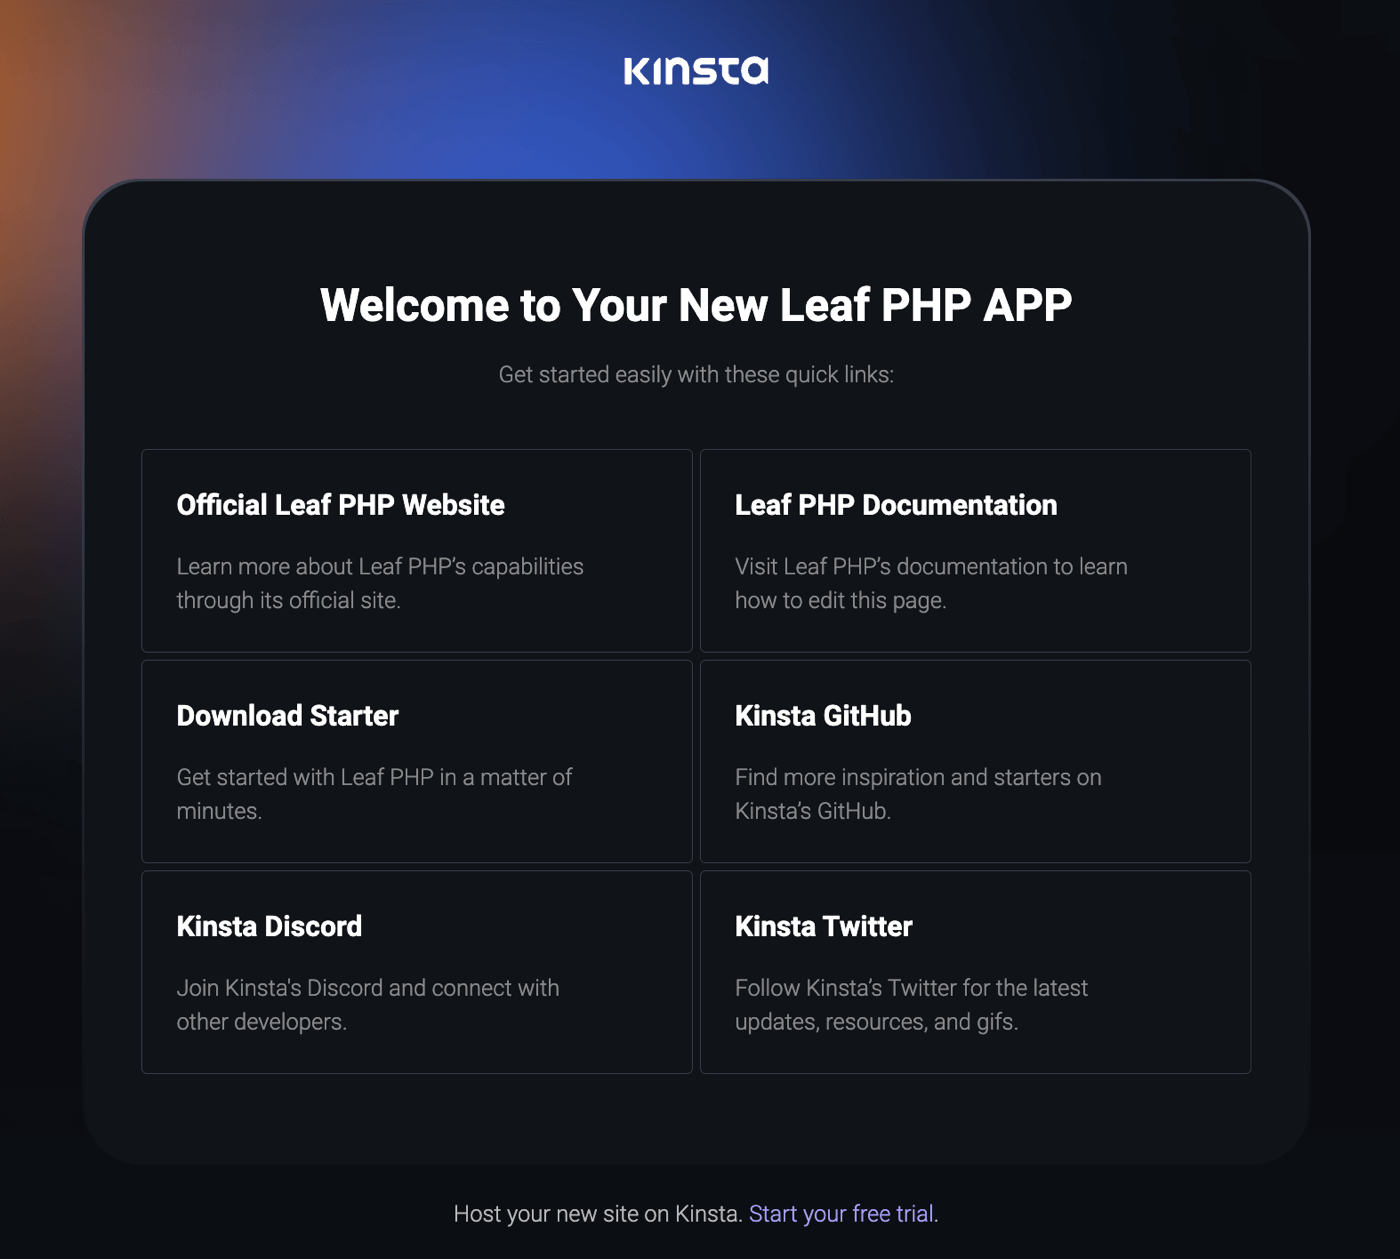 Kinsta Welcome page after successful installation of Leaf PHP.